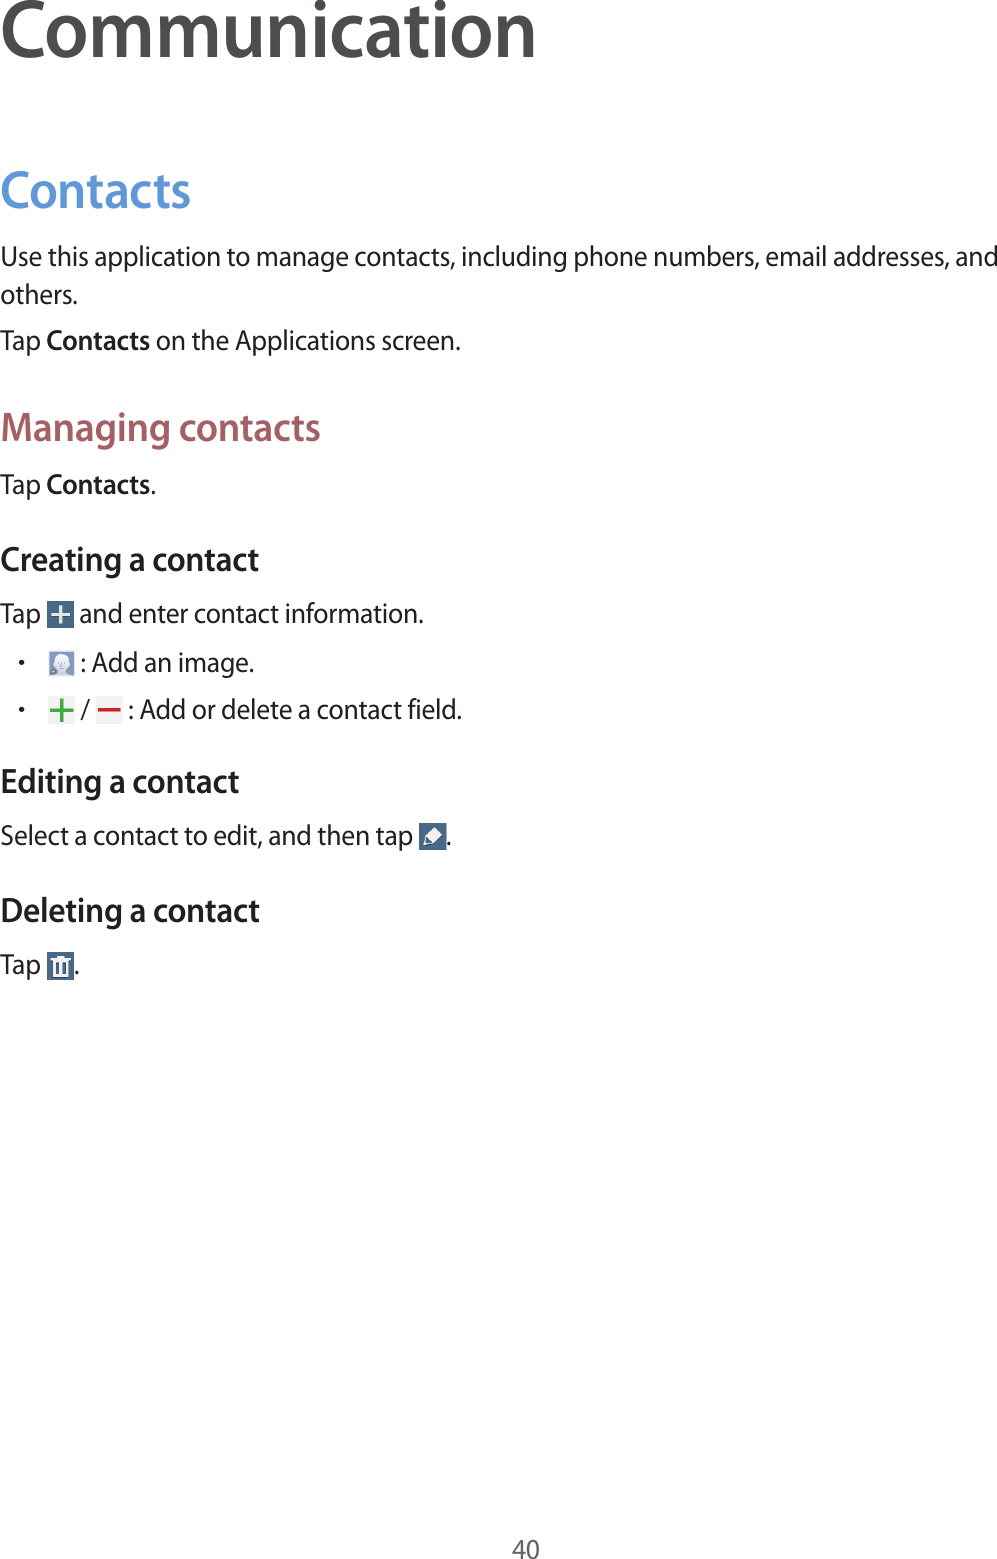 40CommunicationContactsUse this application to manage contacts, including phone numbers, email addresses, and others.Tap Contacts on the Applications screen.Managing contactsTap Contacts.Creating a contactTap   and enter contact information.• : Add an image.• /   : Add or delete a contact field.Editing a contactSelect a contact to edit, and then tap  .Deleting a contactTap  .